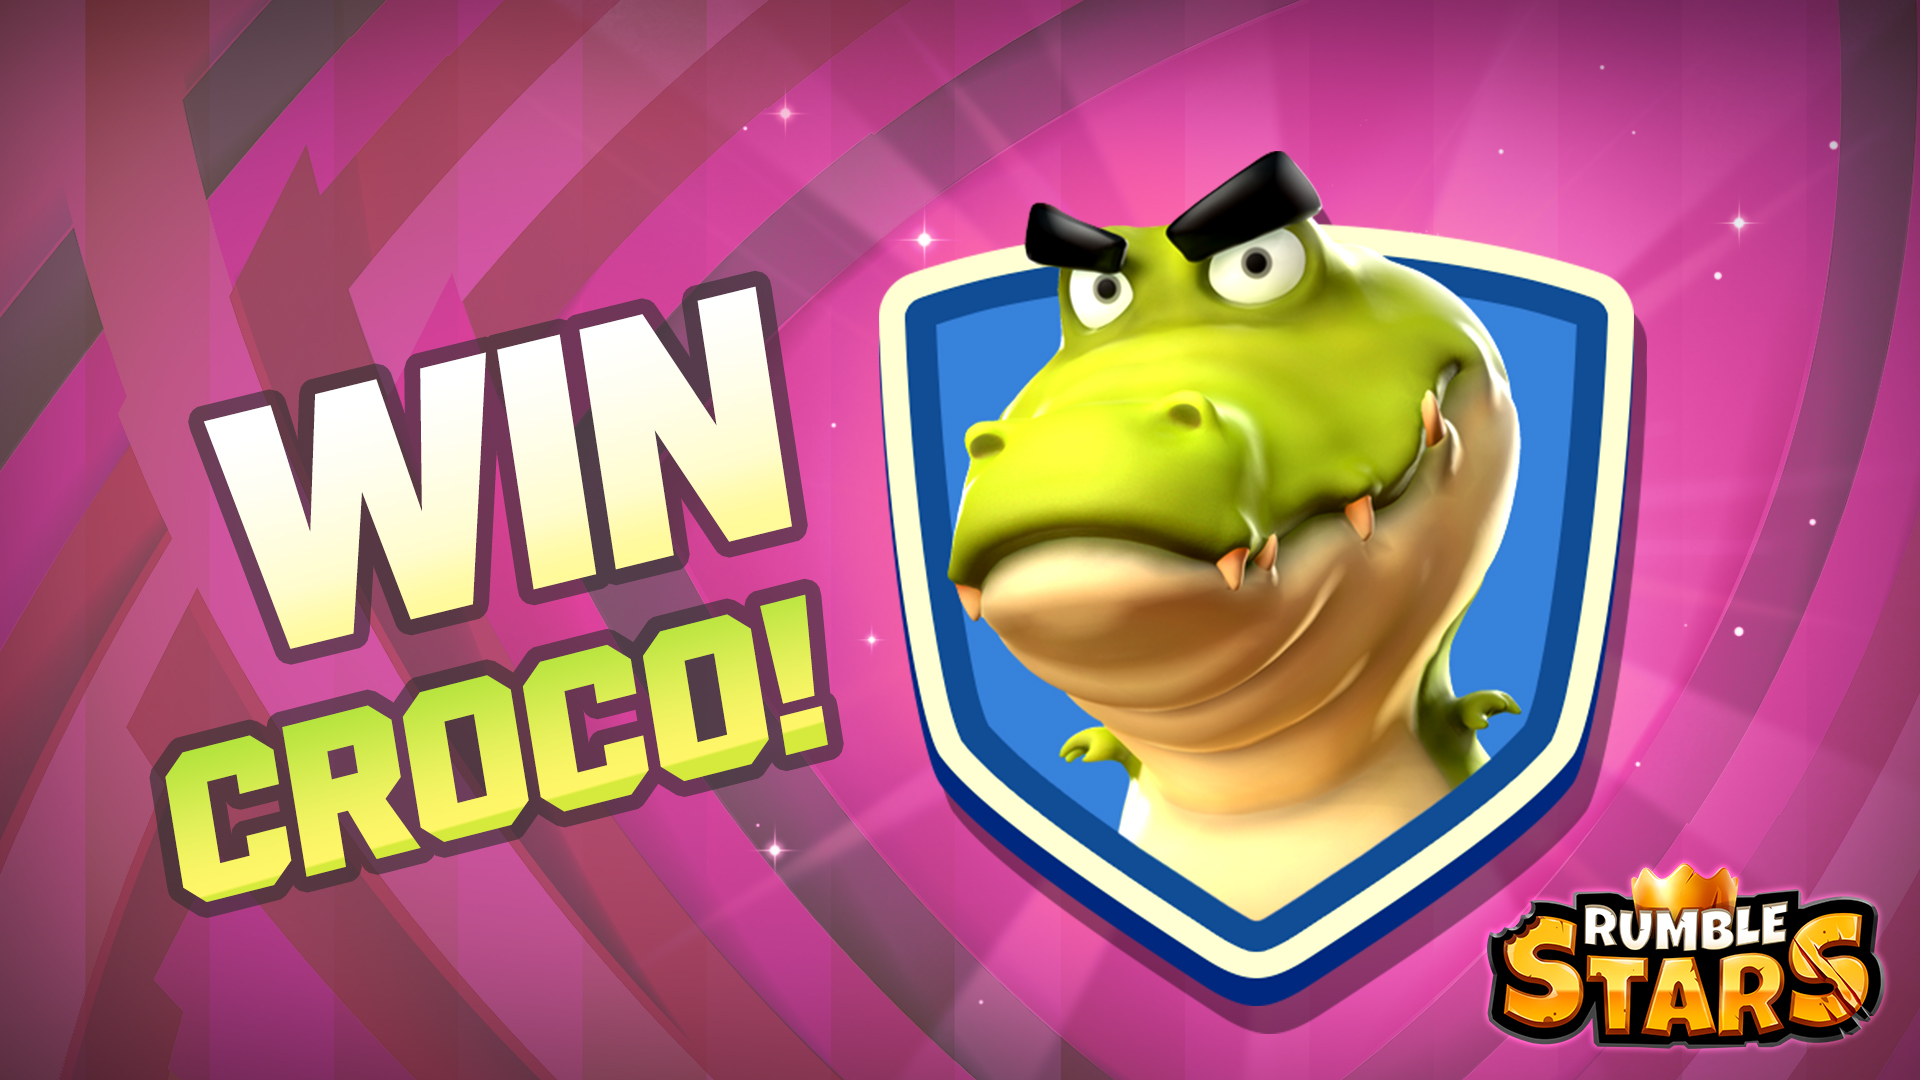 Rumble Stars Football We Started A Crocolicious Special Challenge For The Weekend Rumblestars Croco Specialchallenge Weekend T Co Zirdyvmt4b Twitter